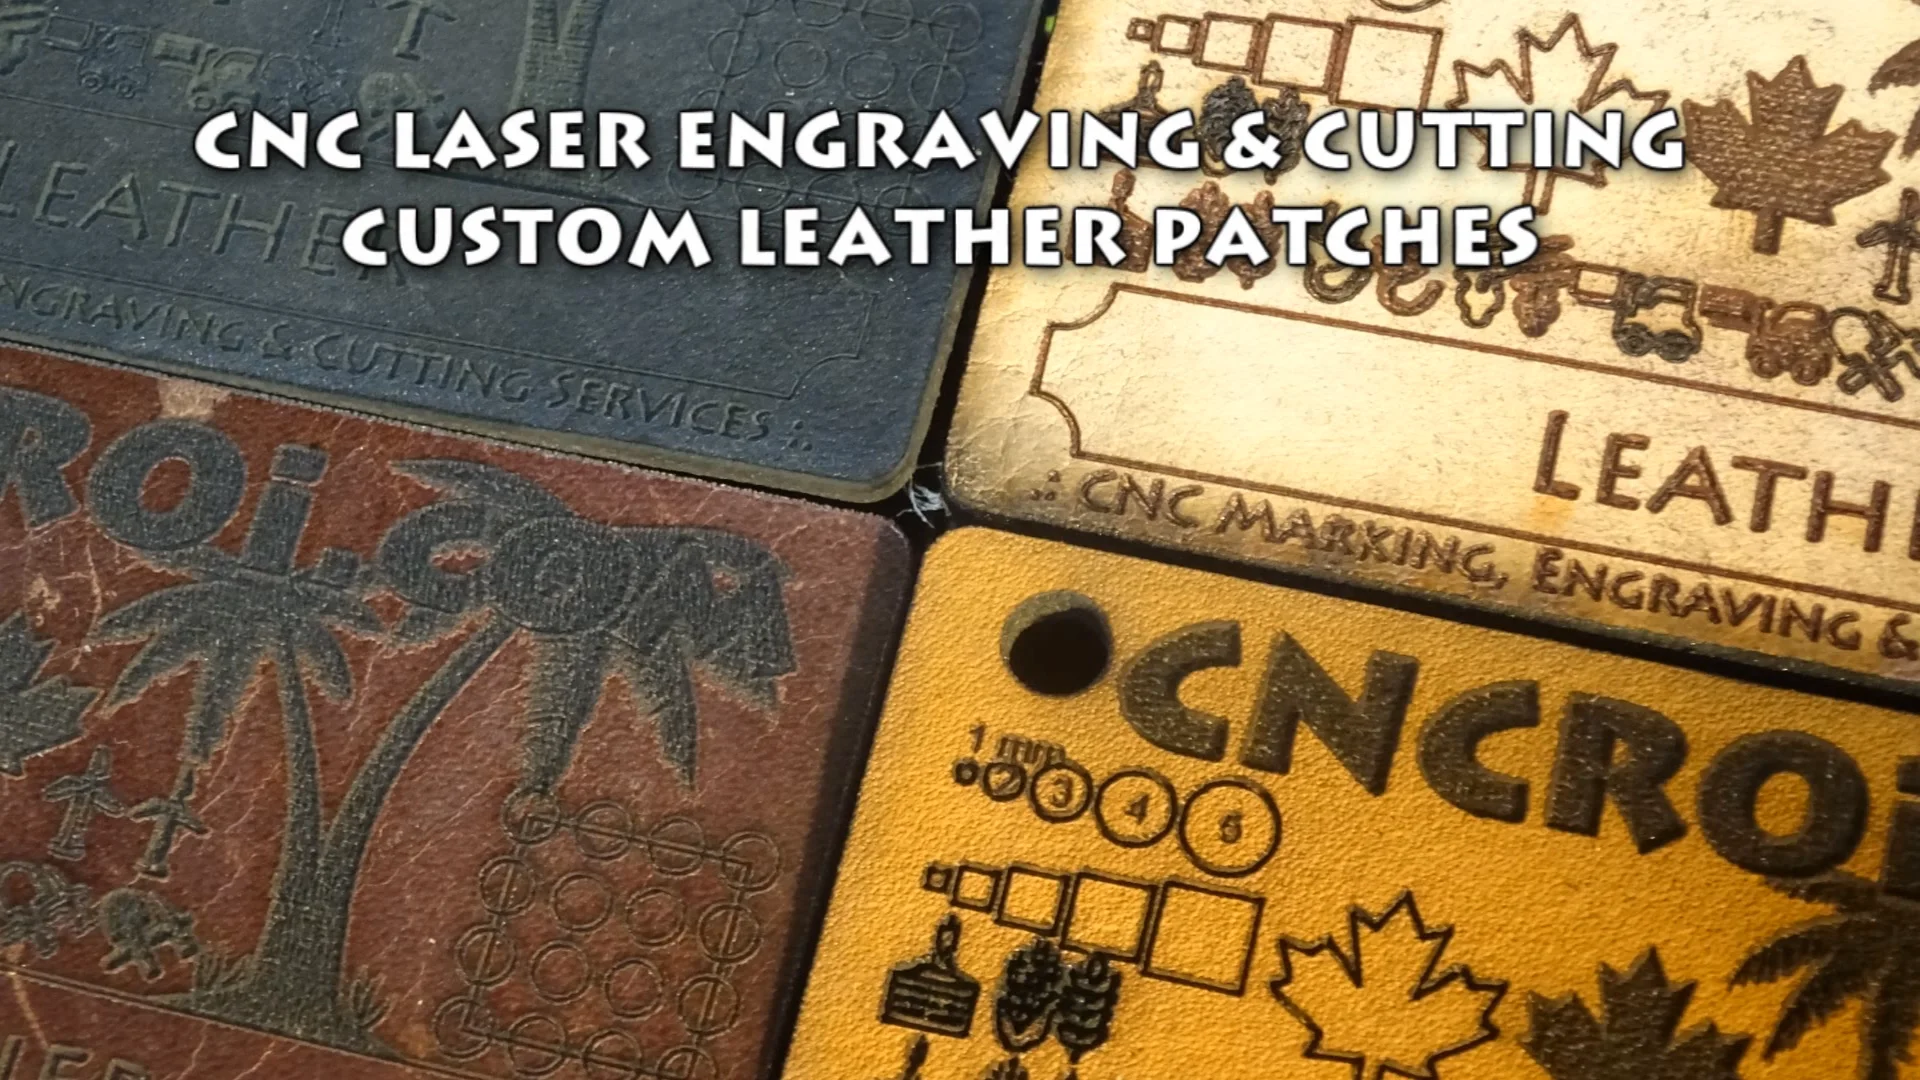 CNC Laser Engraving & Cutting Custom Leather Patches on Vimeo